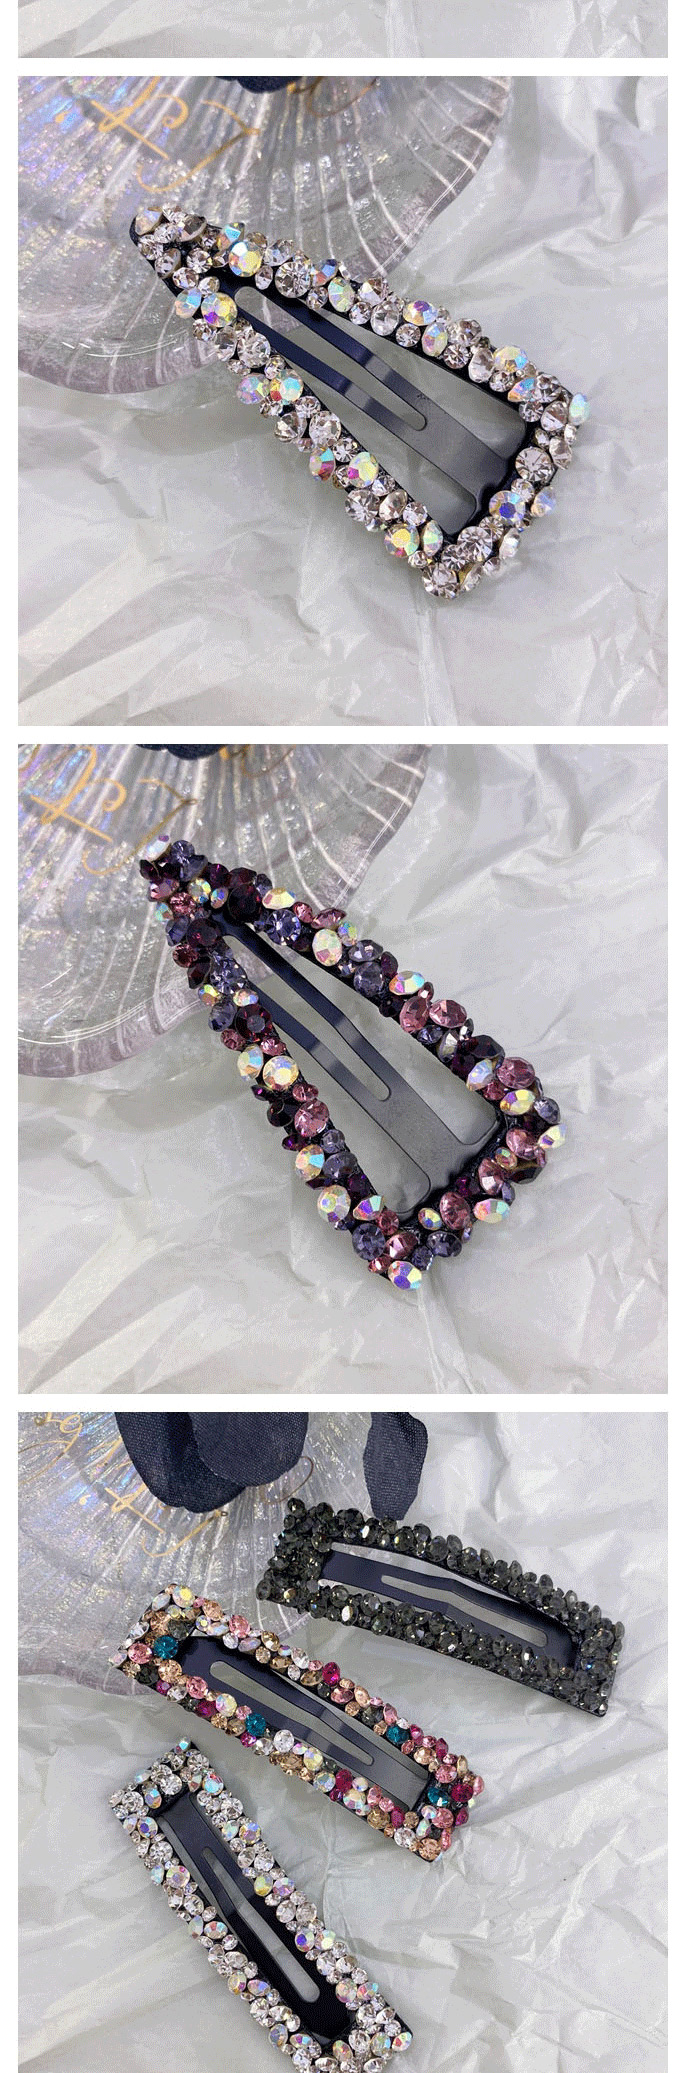 Fashion Water Drop White Diamond-shaped Seamless Crystal Hollow Water Drop Square Triangle Hairpin,Hairpins